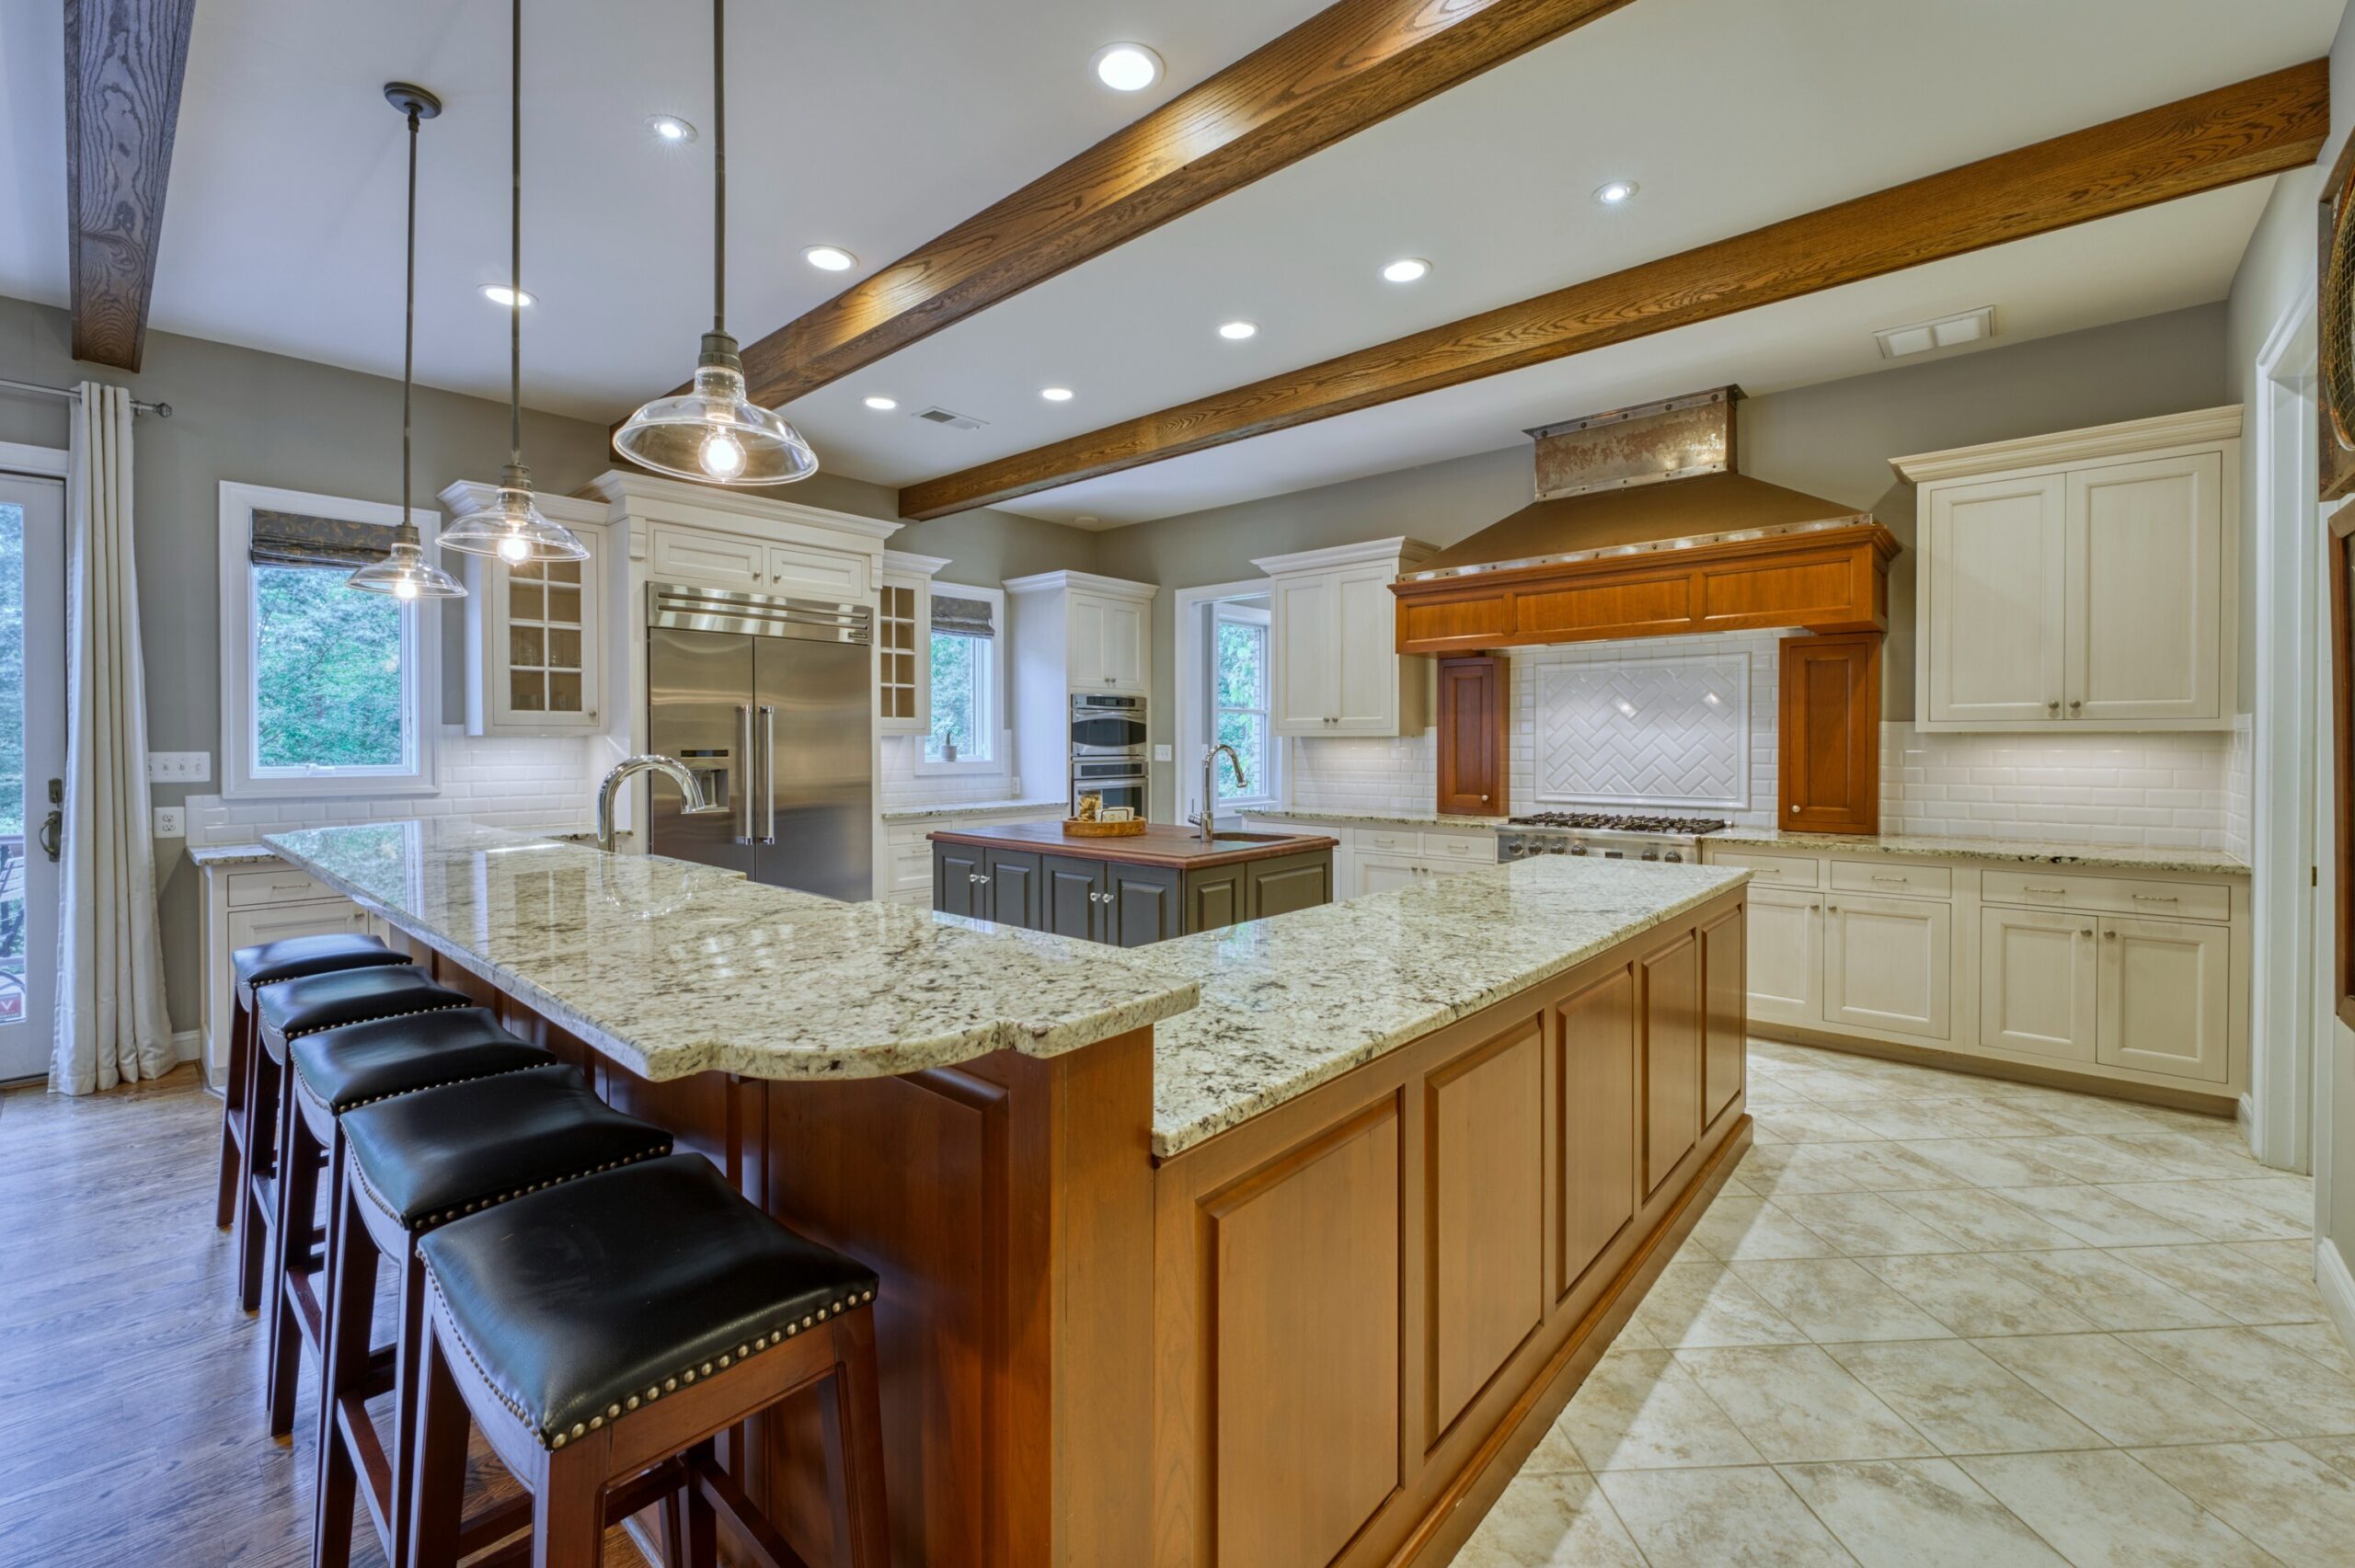 Professional interior photo of 40046 Mount Gilead Rd in Leesburg, Virginia - showing the kitchen with large gas stove and huge custom range hood and island with farm sink and butcher block counter. 